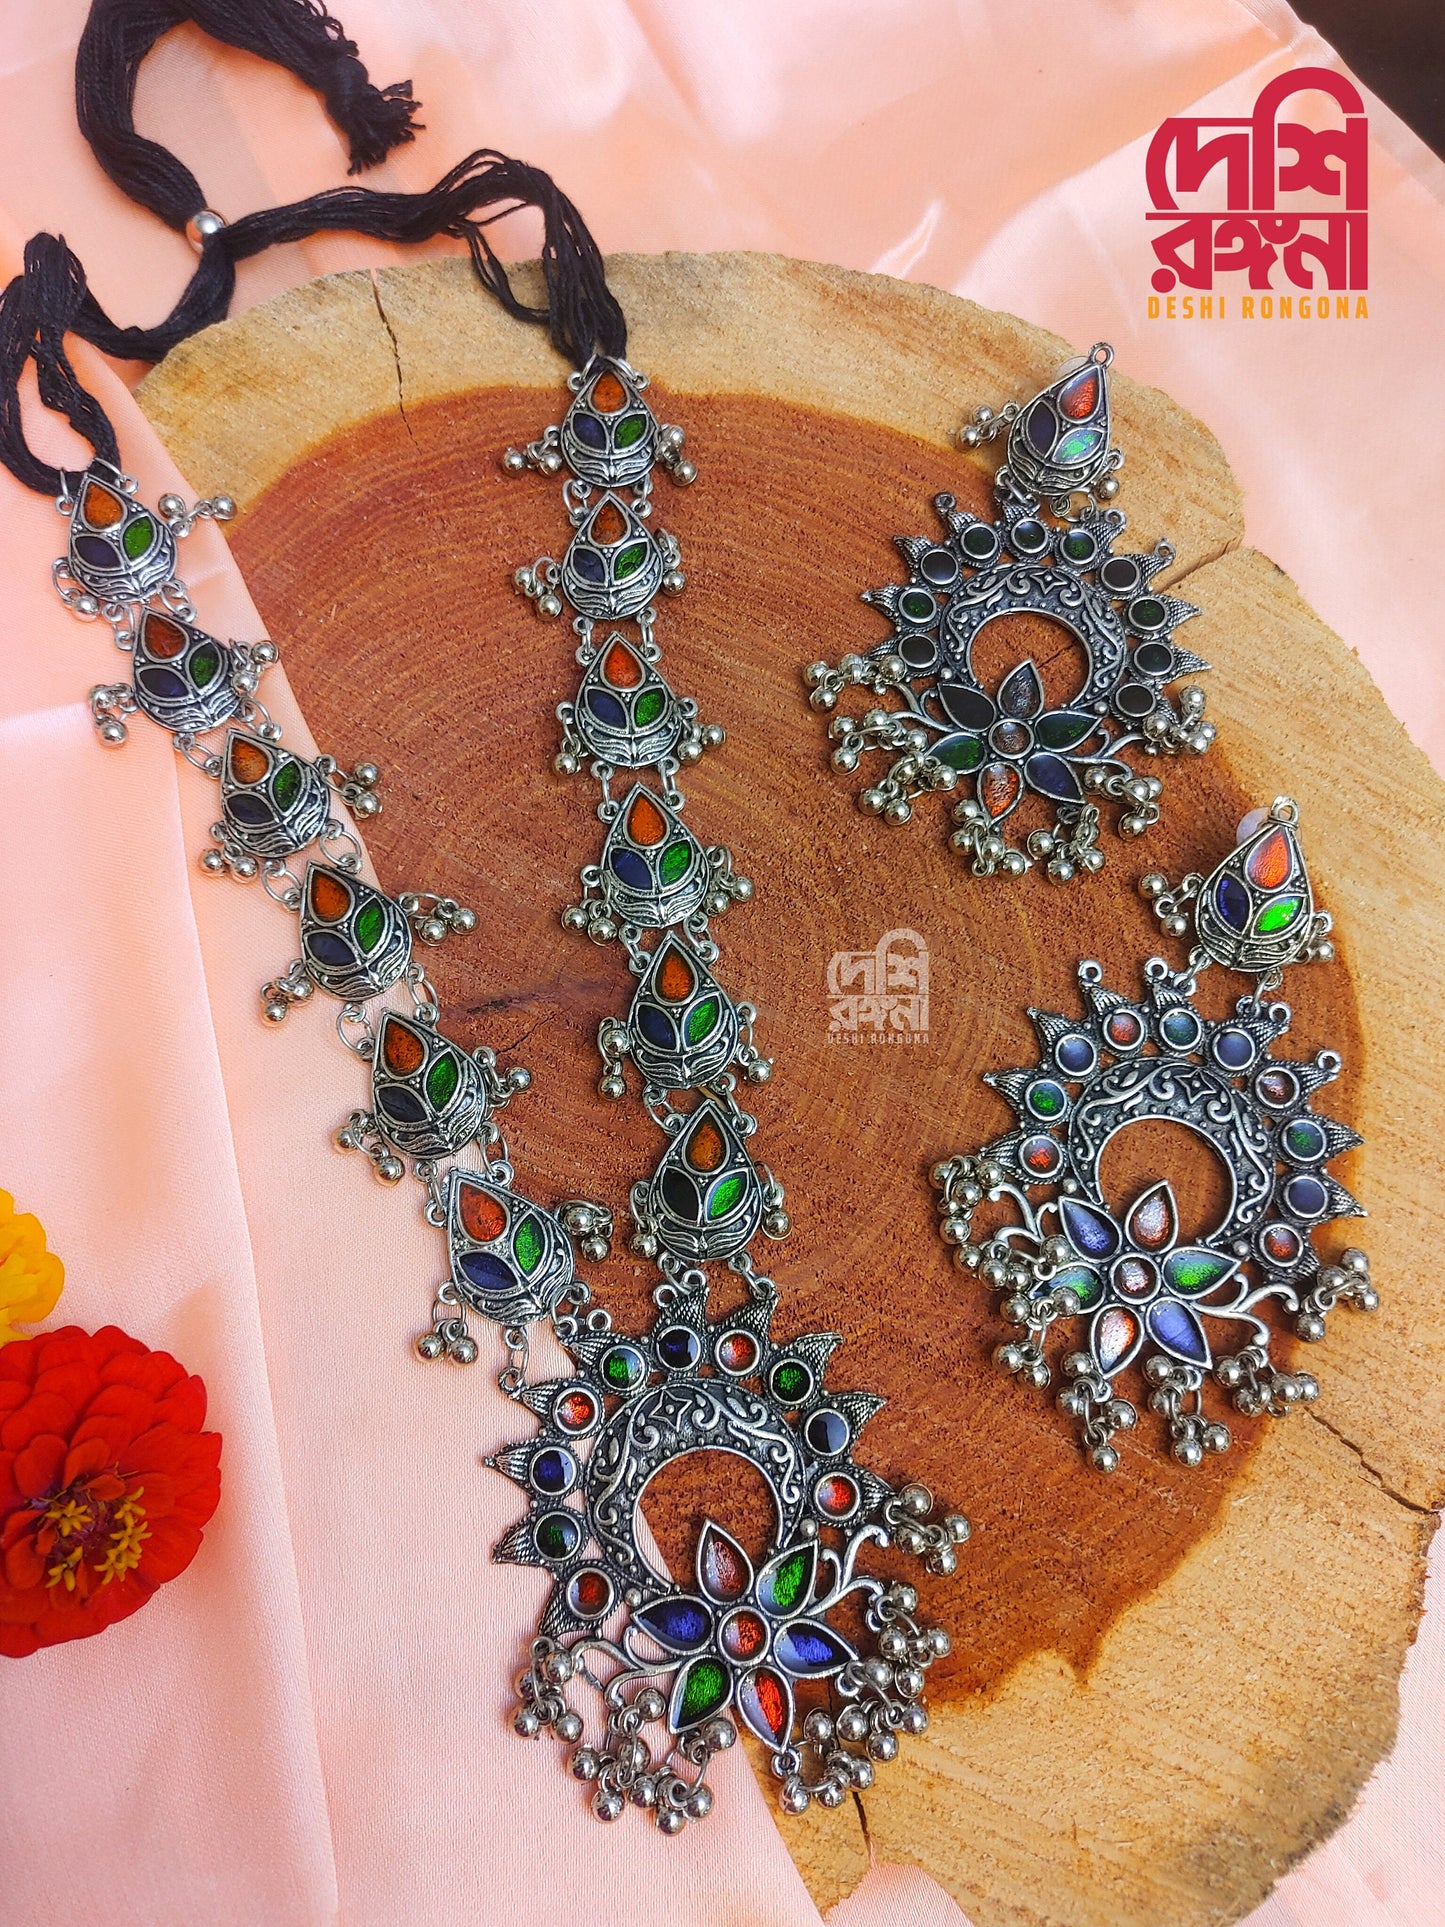 Silver Oxidised Jewelry, Antique Silver Plated, Multi stone, Necklace, Earrings,Indian Bollywood Jewelry,Fashion Set, Afgan/Bohemian Jewelry